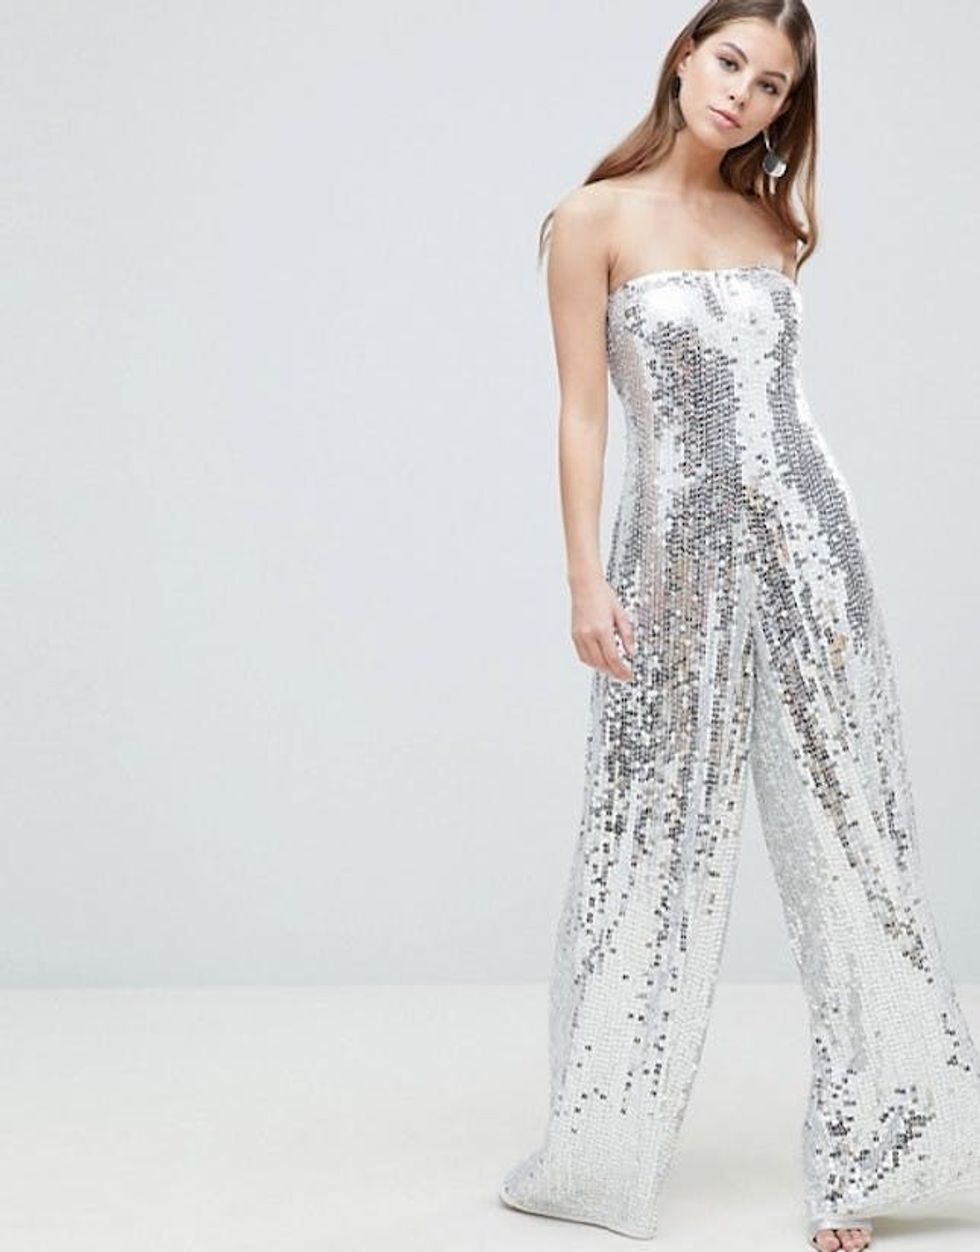 13 Sequin Jumpsuits for Catching Saturday Night Fever - Brit + Co